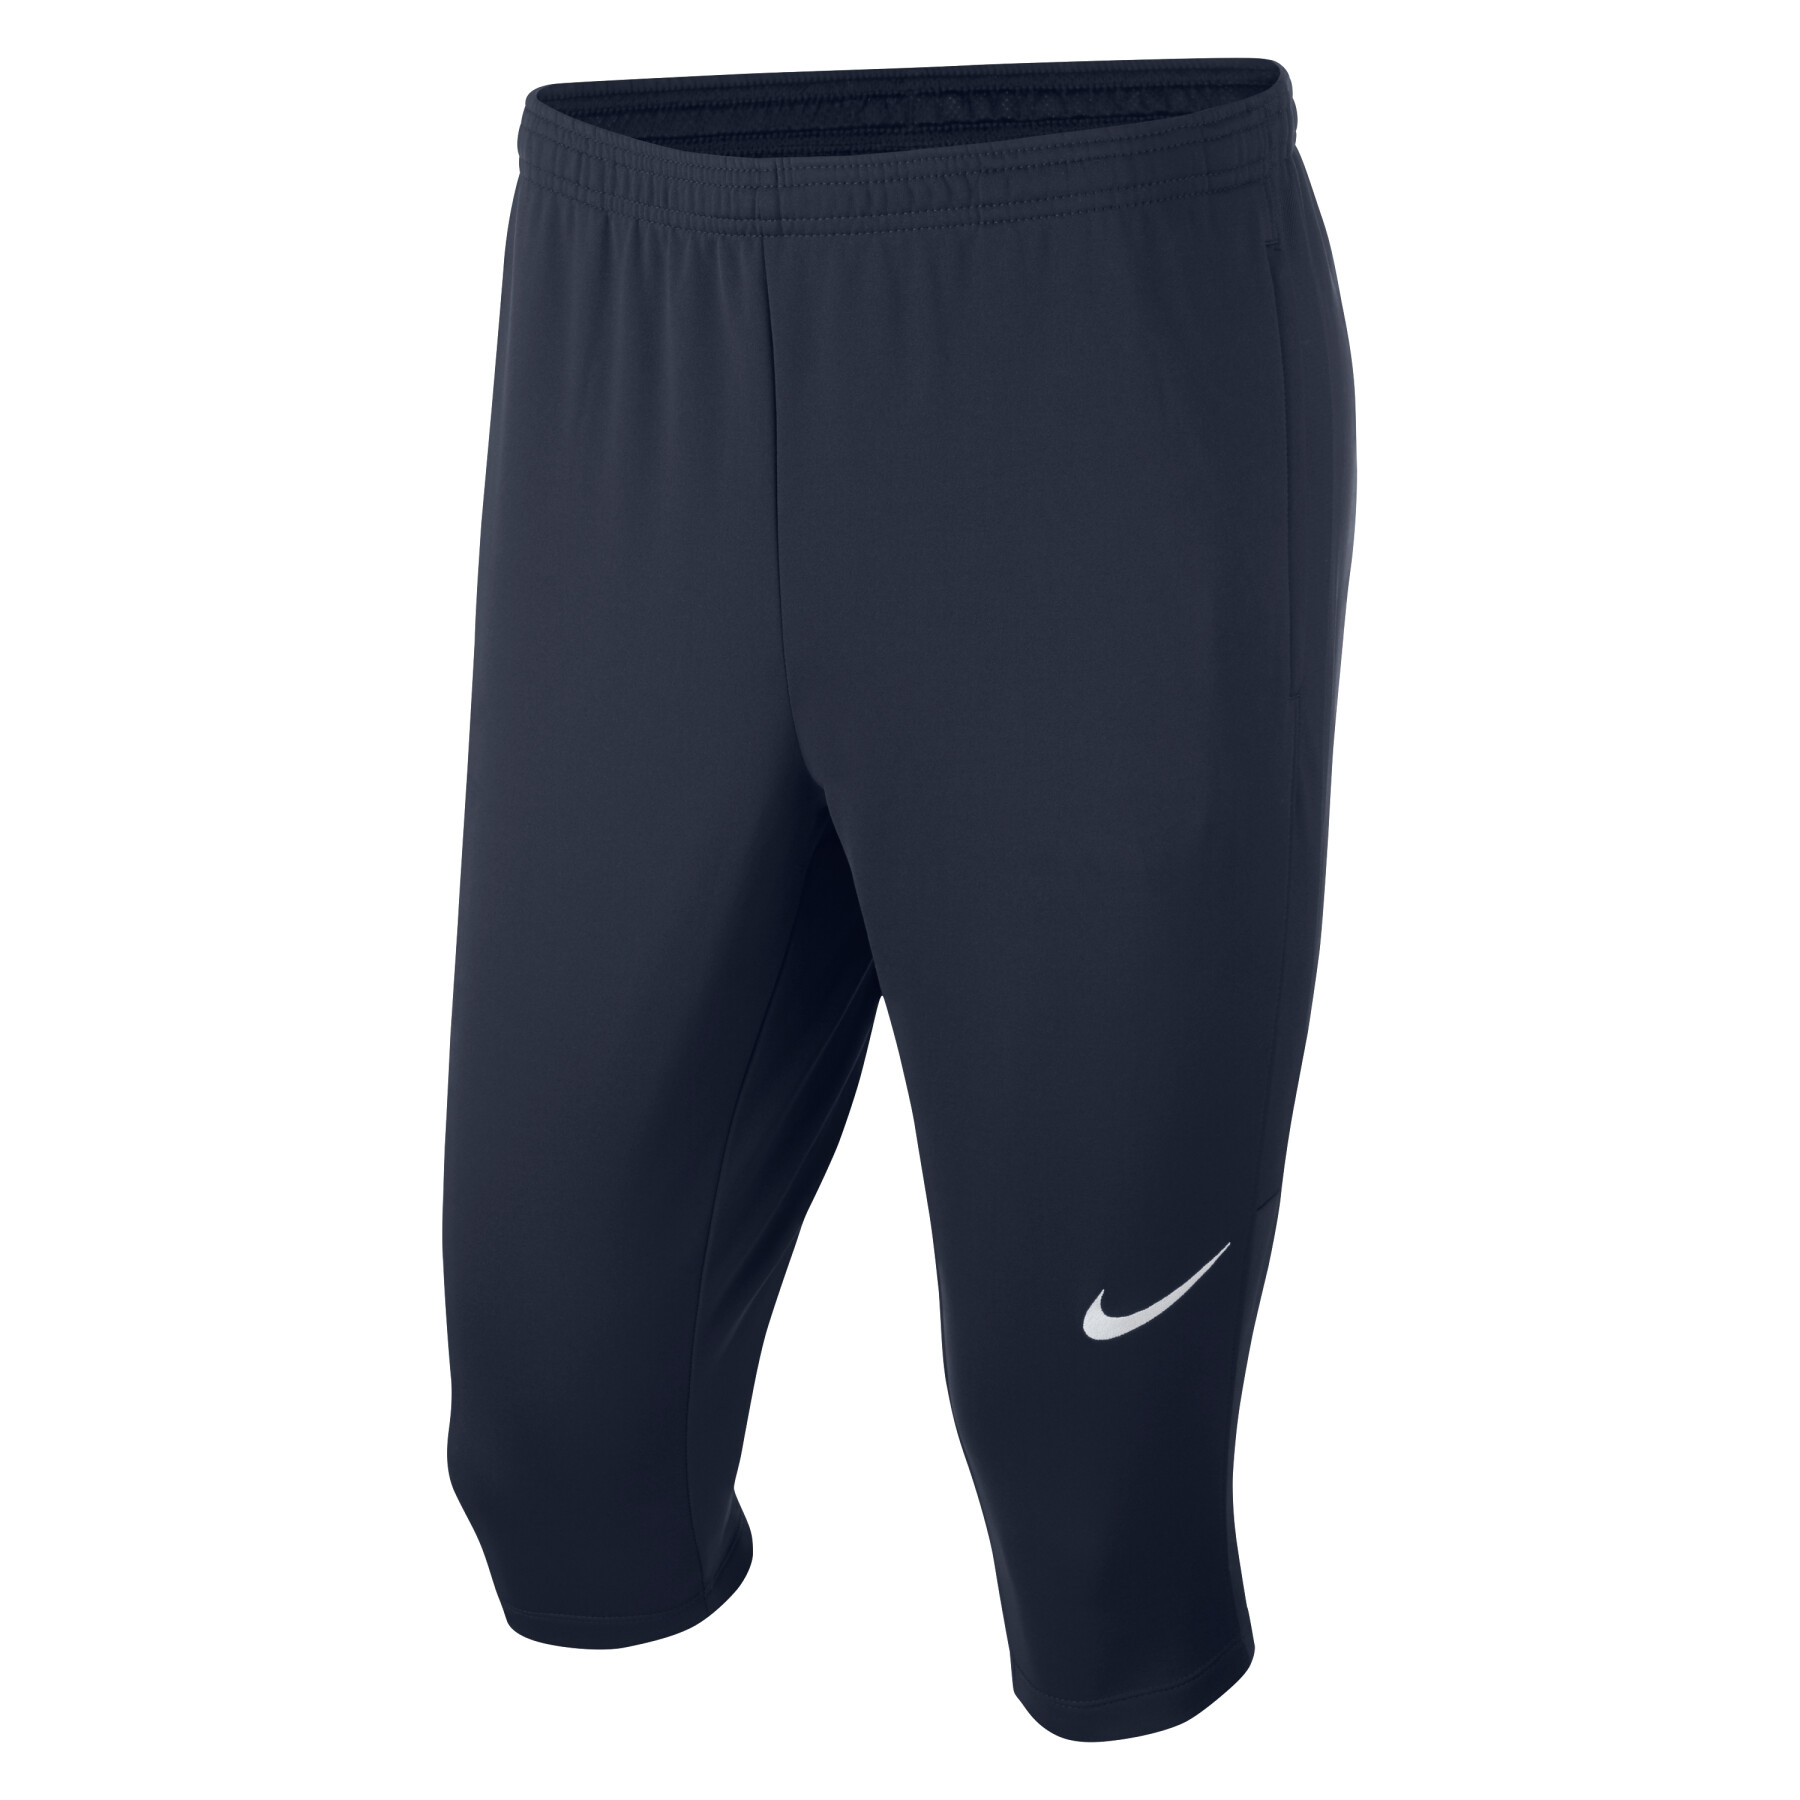 3/4 pants for children Nike Dry Academy 18